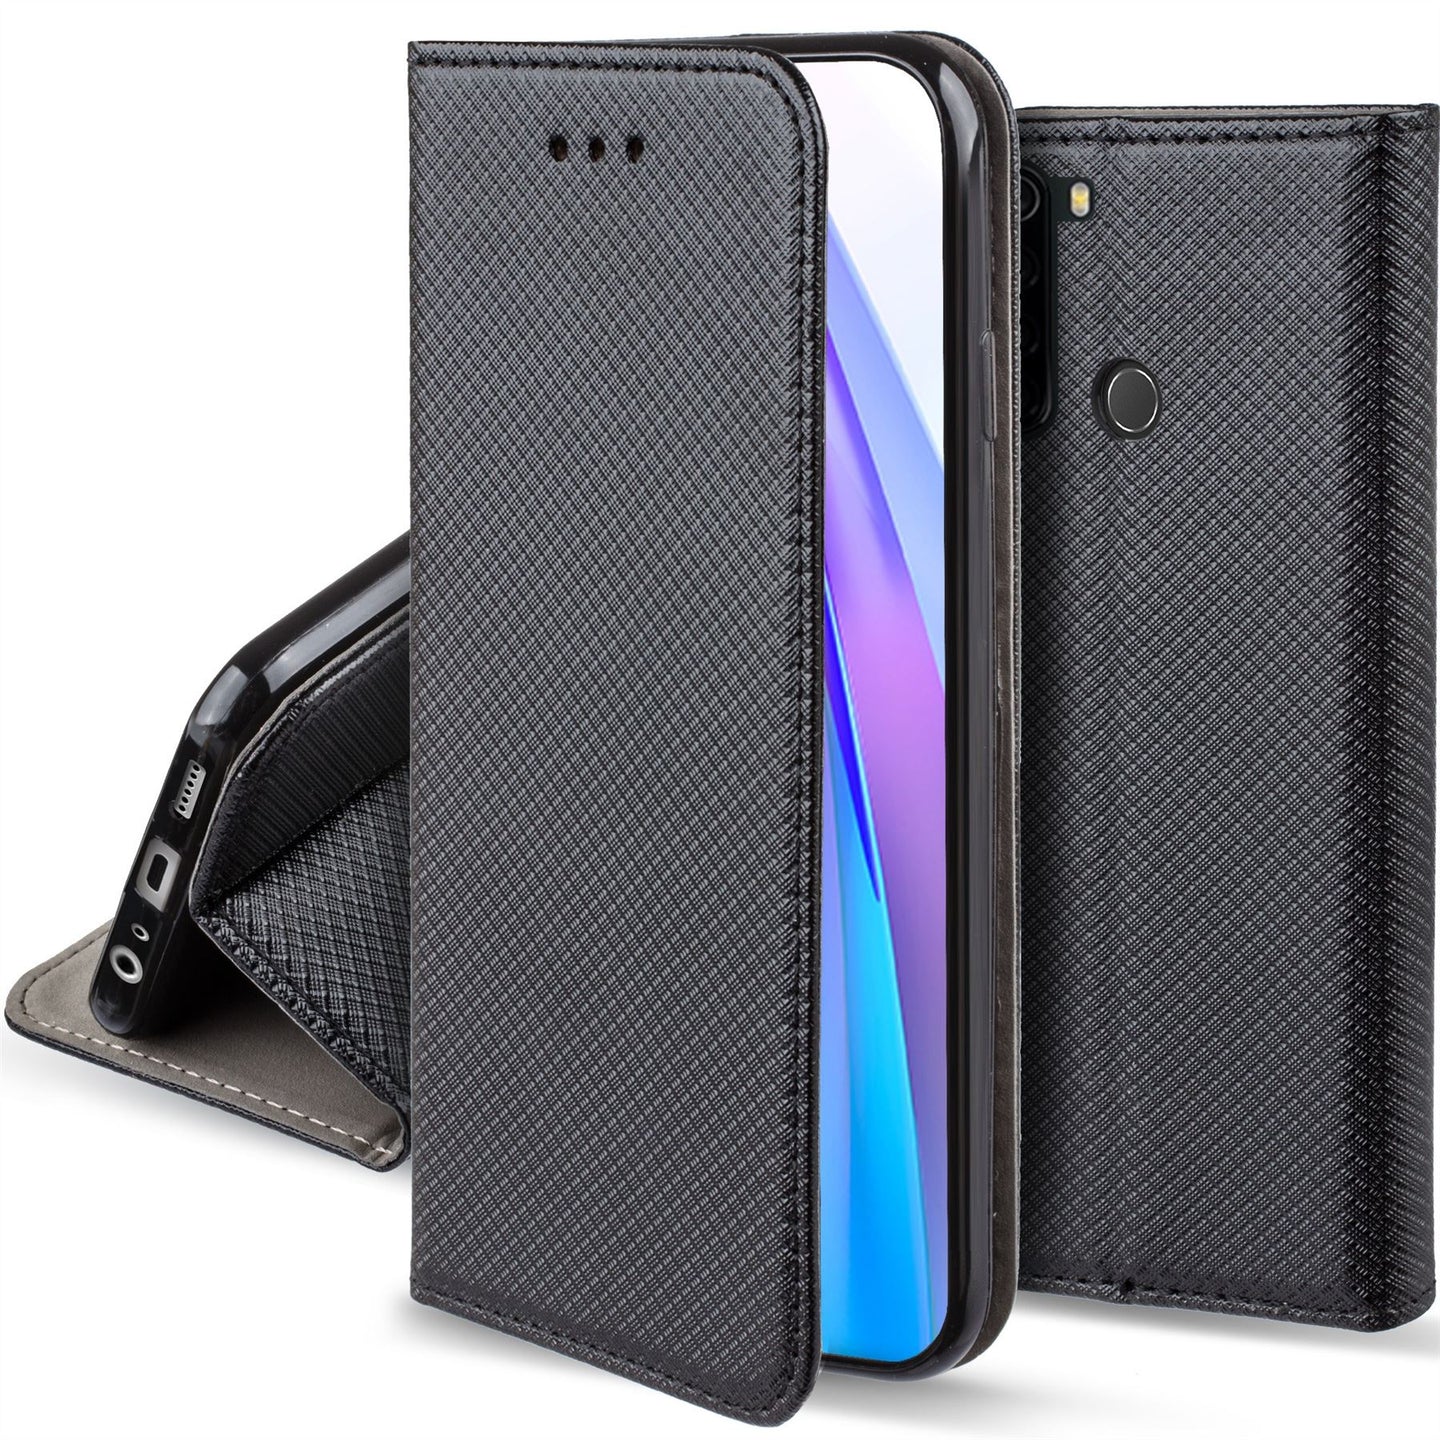 Moozy Case Flip Cover for Xiaomi Redmi Note 8T, Black - Smart Magnetic Flip Case with Card Holder and Stand